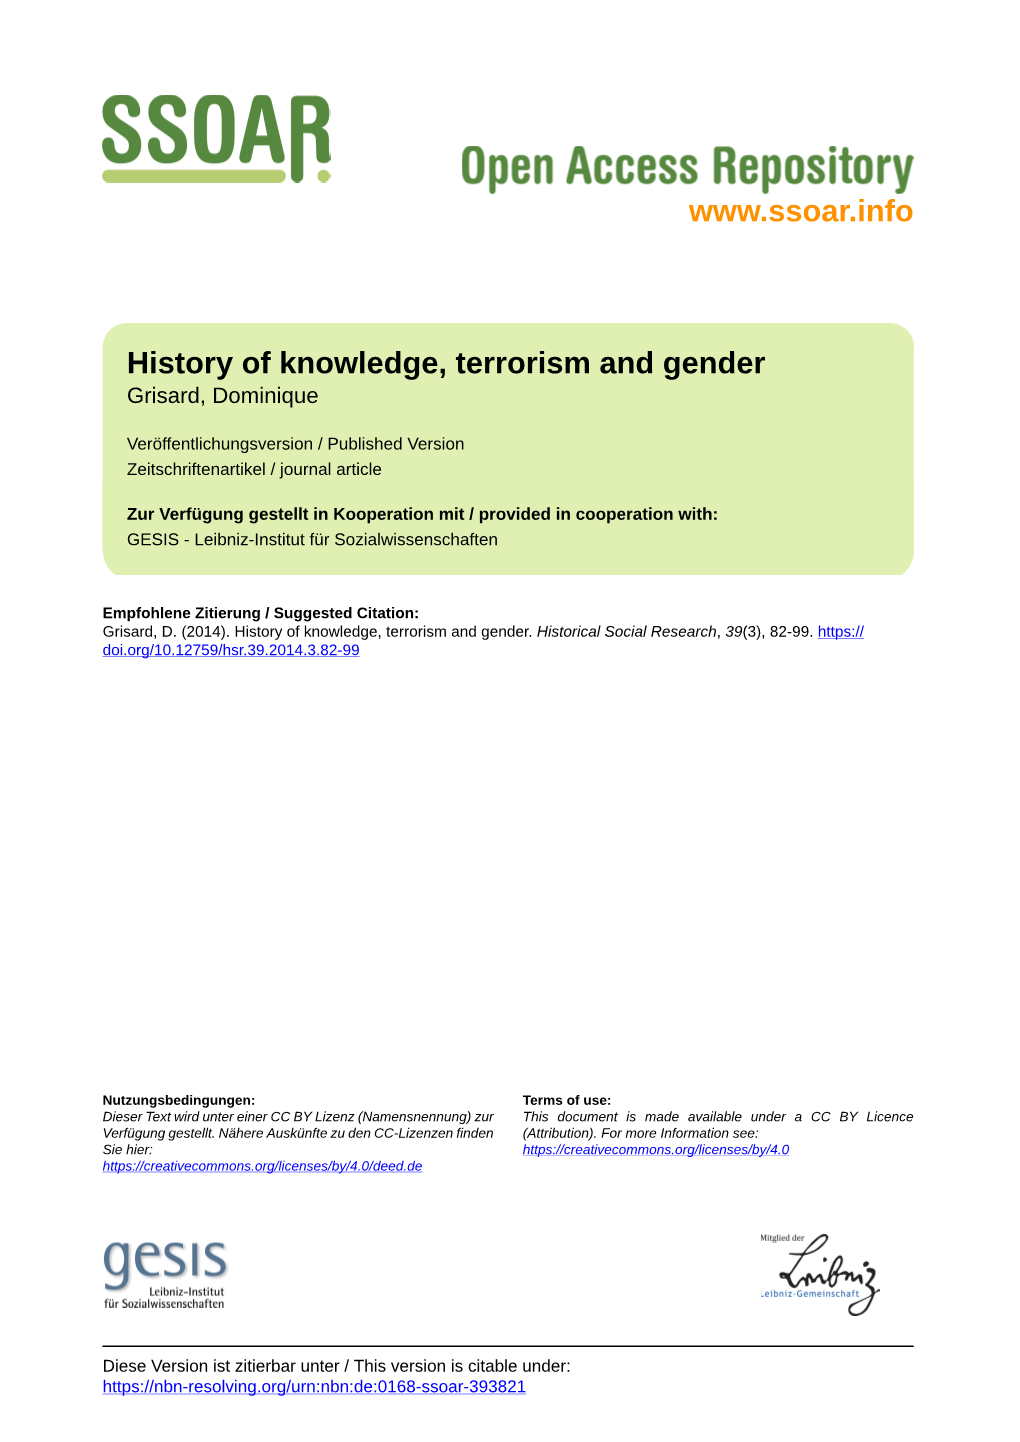 History of Knowledge, Terrorism and Gender Grisard, Dominique